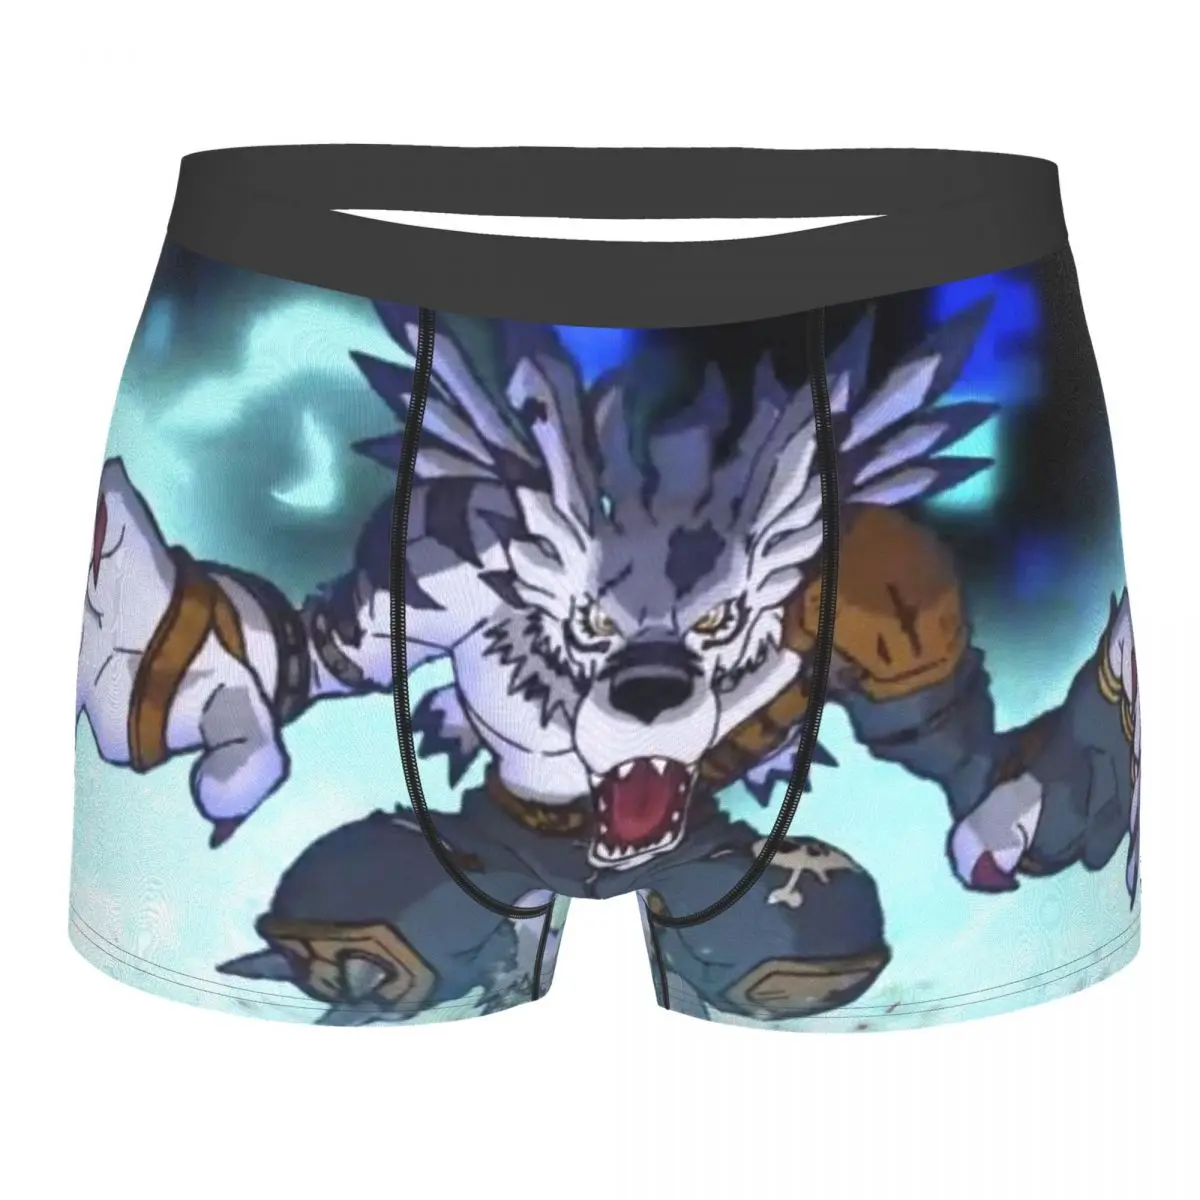 Anime Men's Boxer Briefs Soft Underwear for Mens and Boys